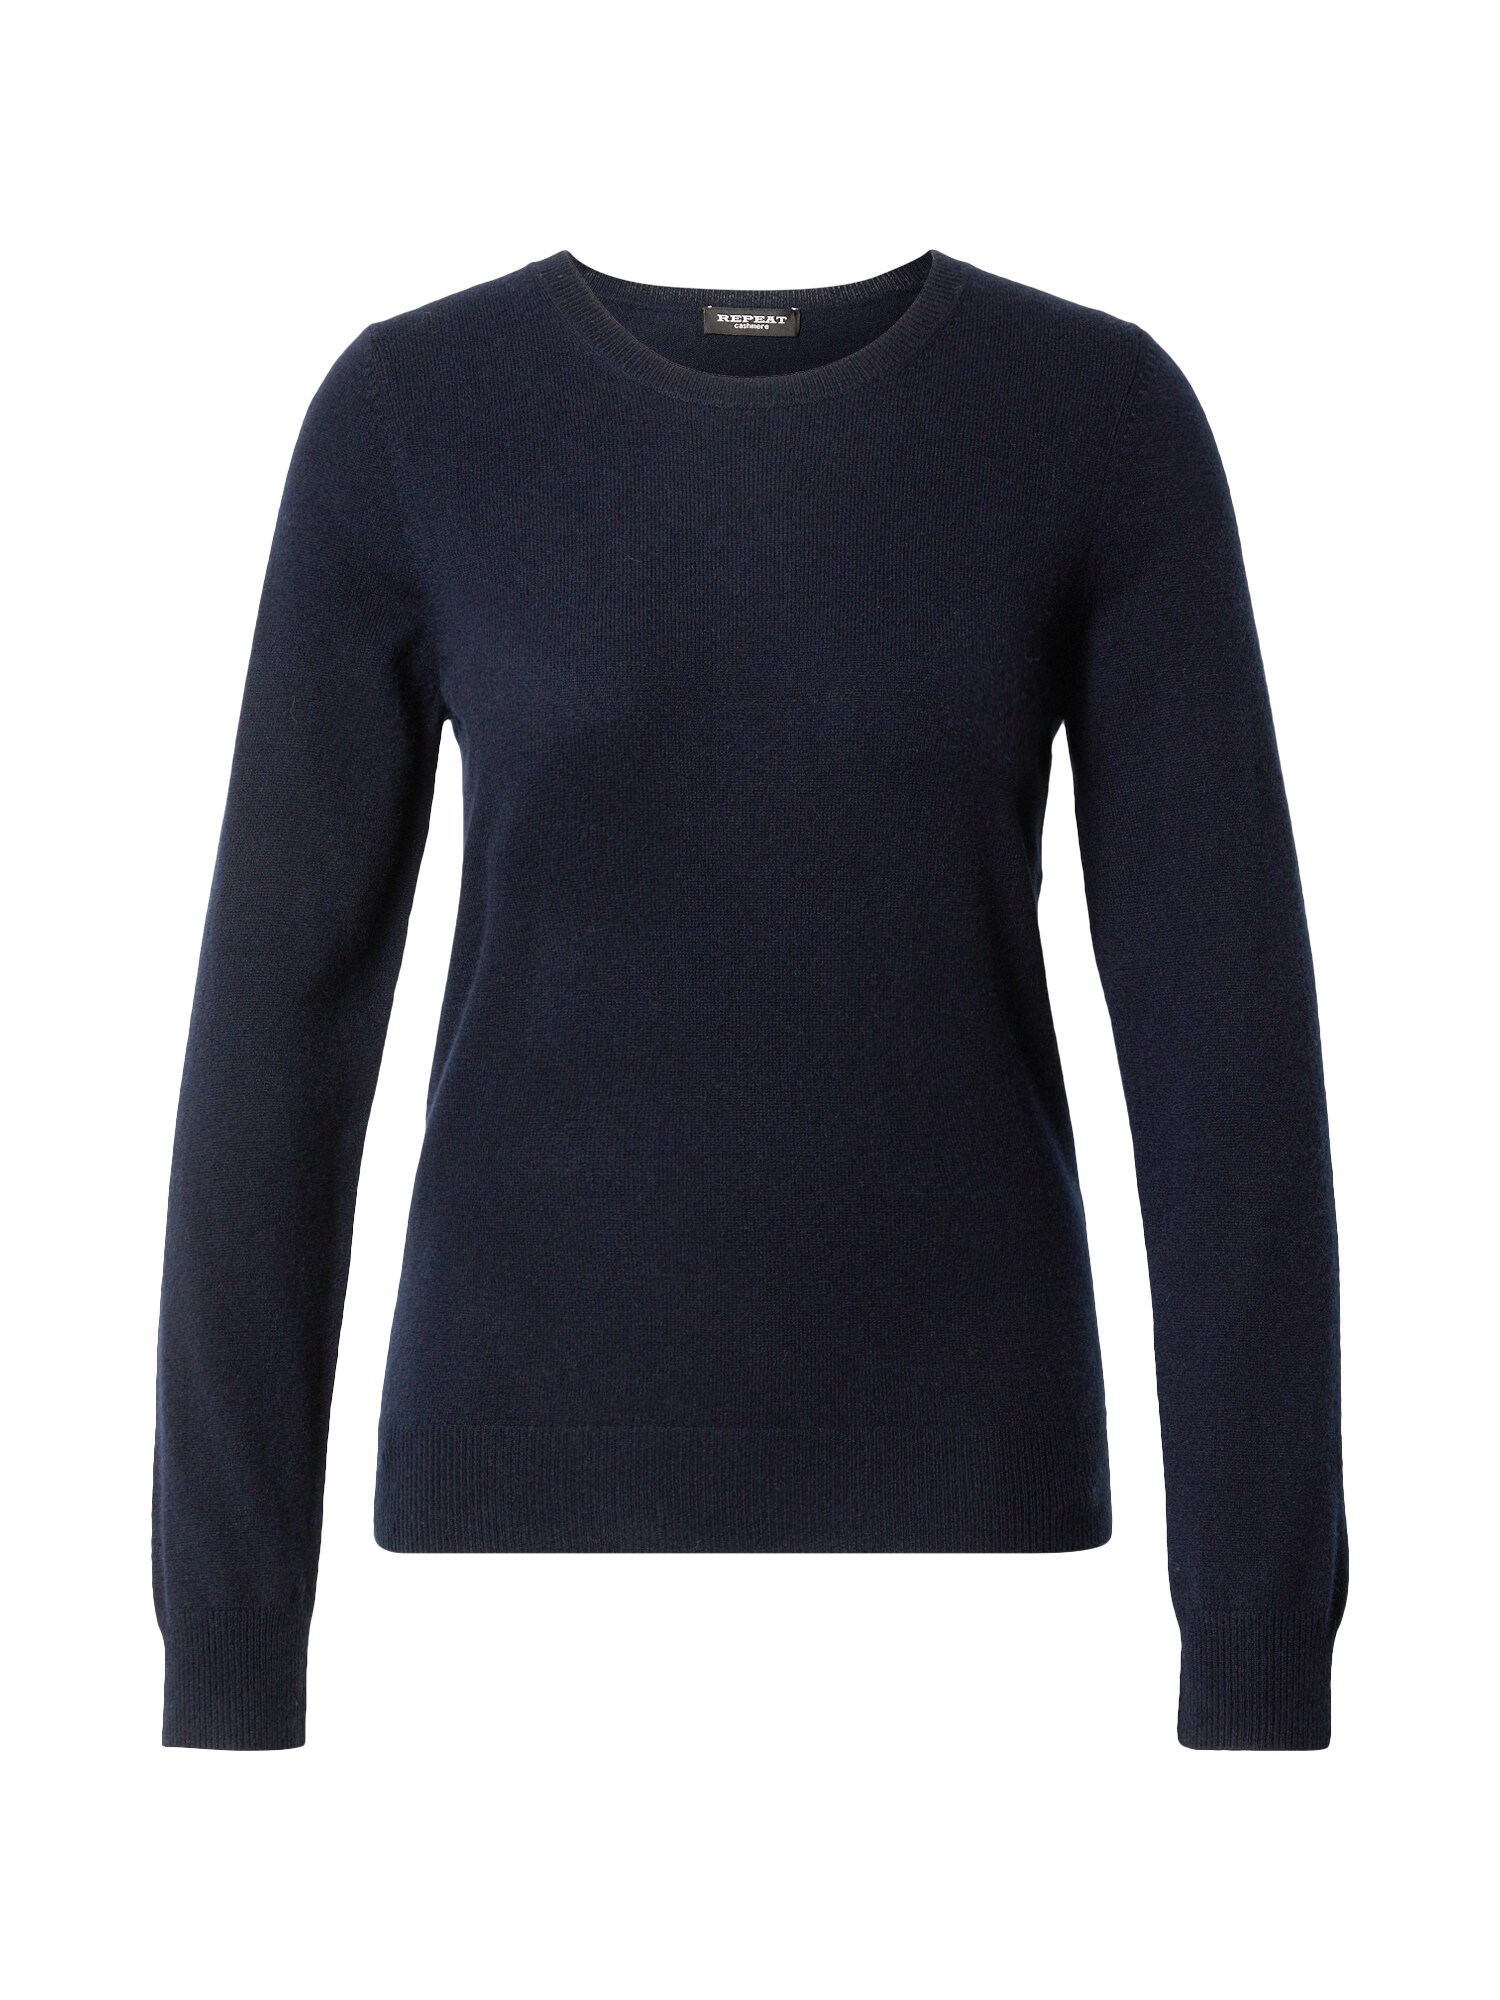 REPEAT Cashmere Megztinis nakties mėlyna